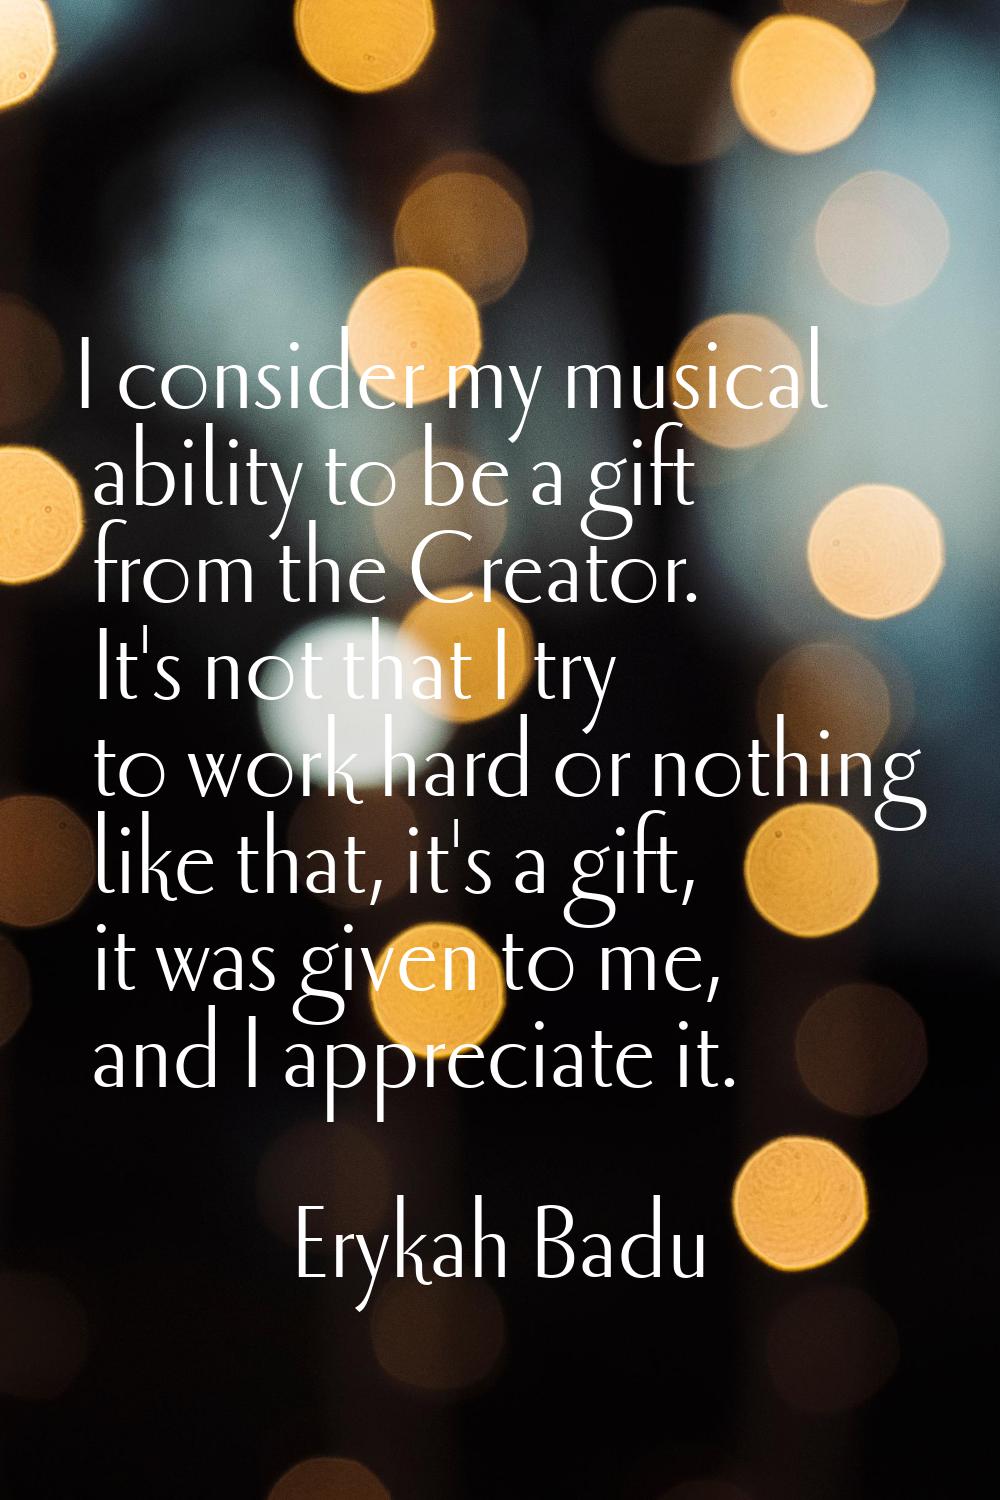 I consider my musical ability to be a gift from the Creator. It's not that I try to work hard or no